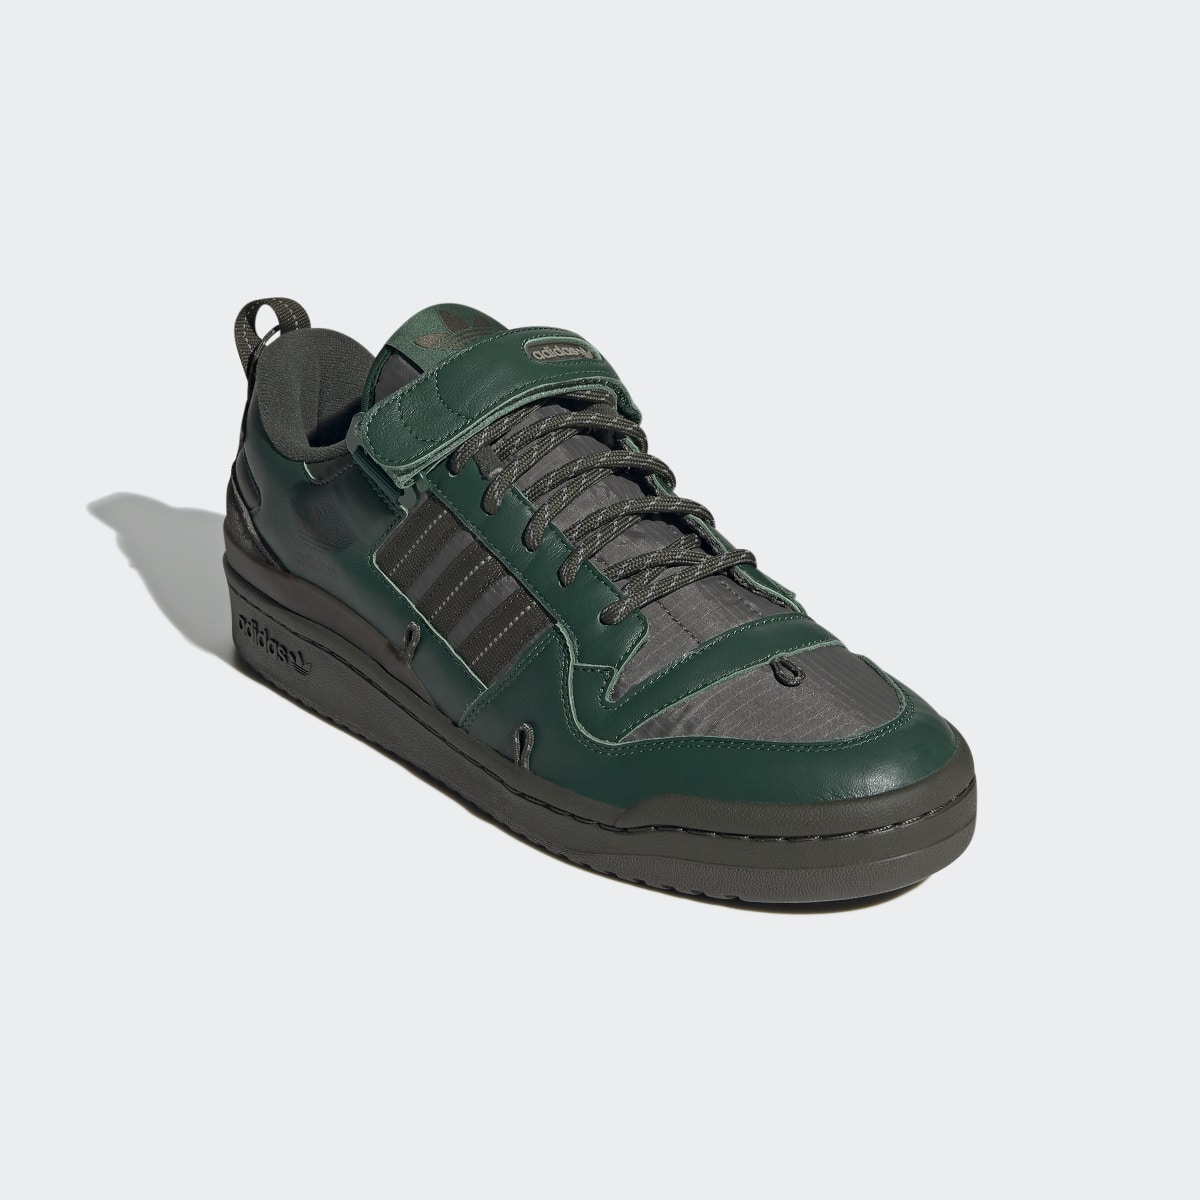 Adidas Forum 84 Camp Low Shoes. 7